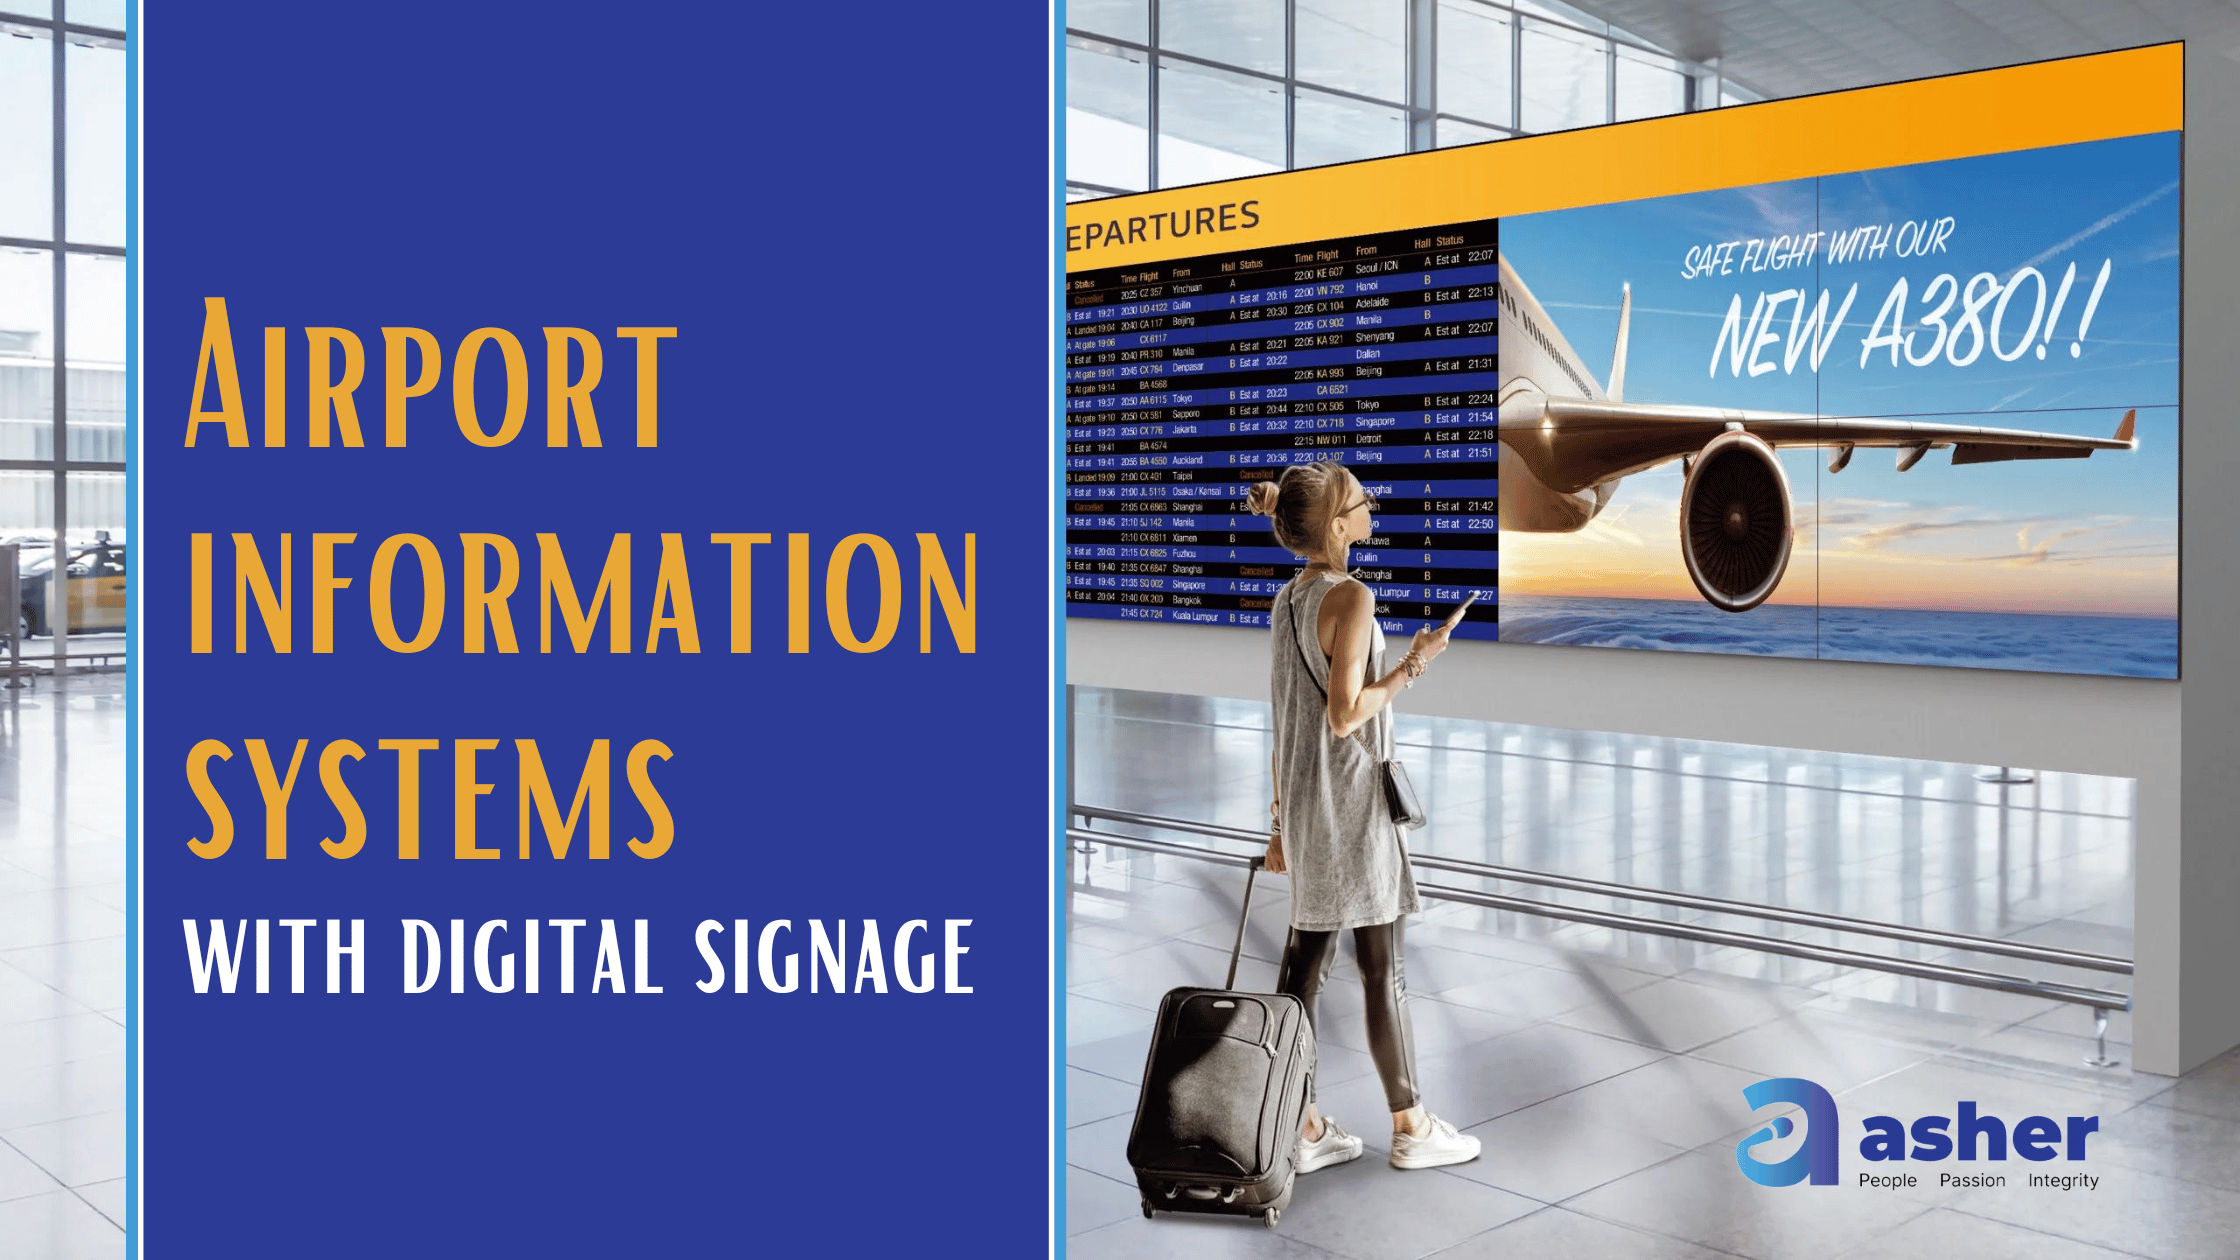 Airport information systems with digital signage: 5 simple ideas